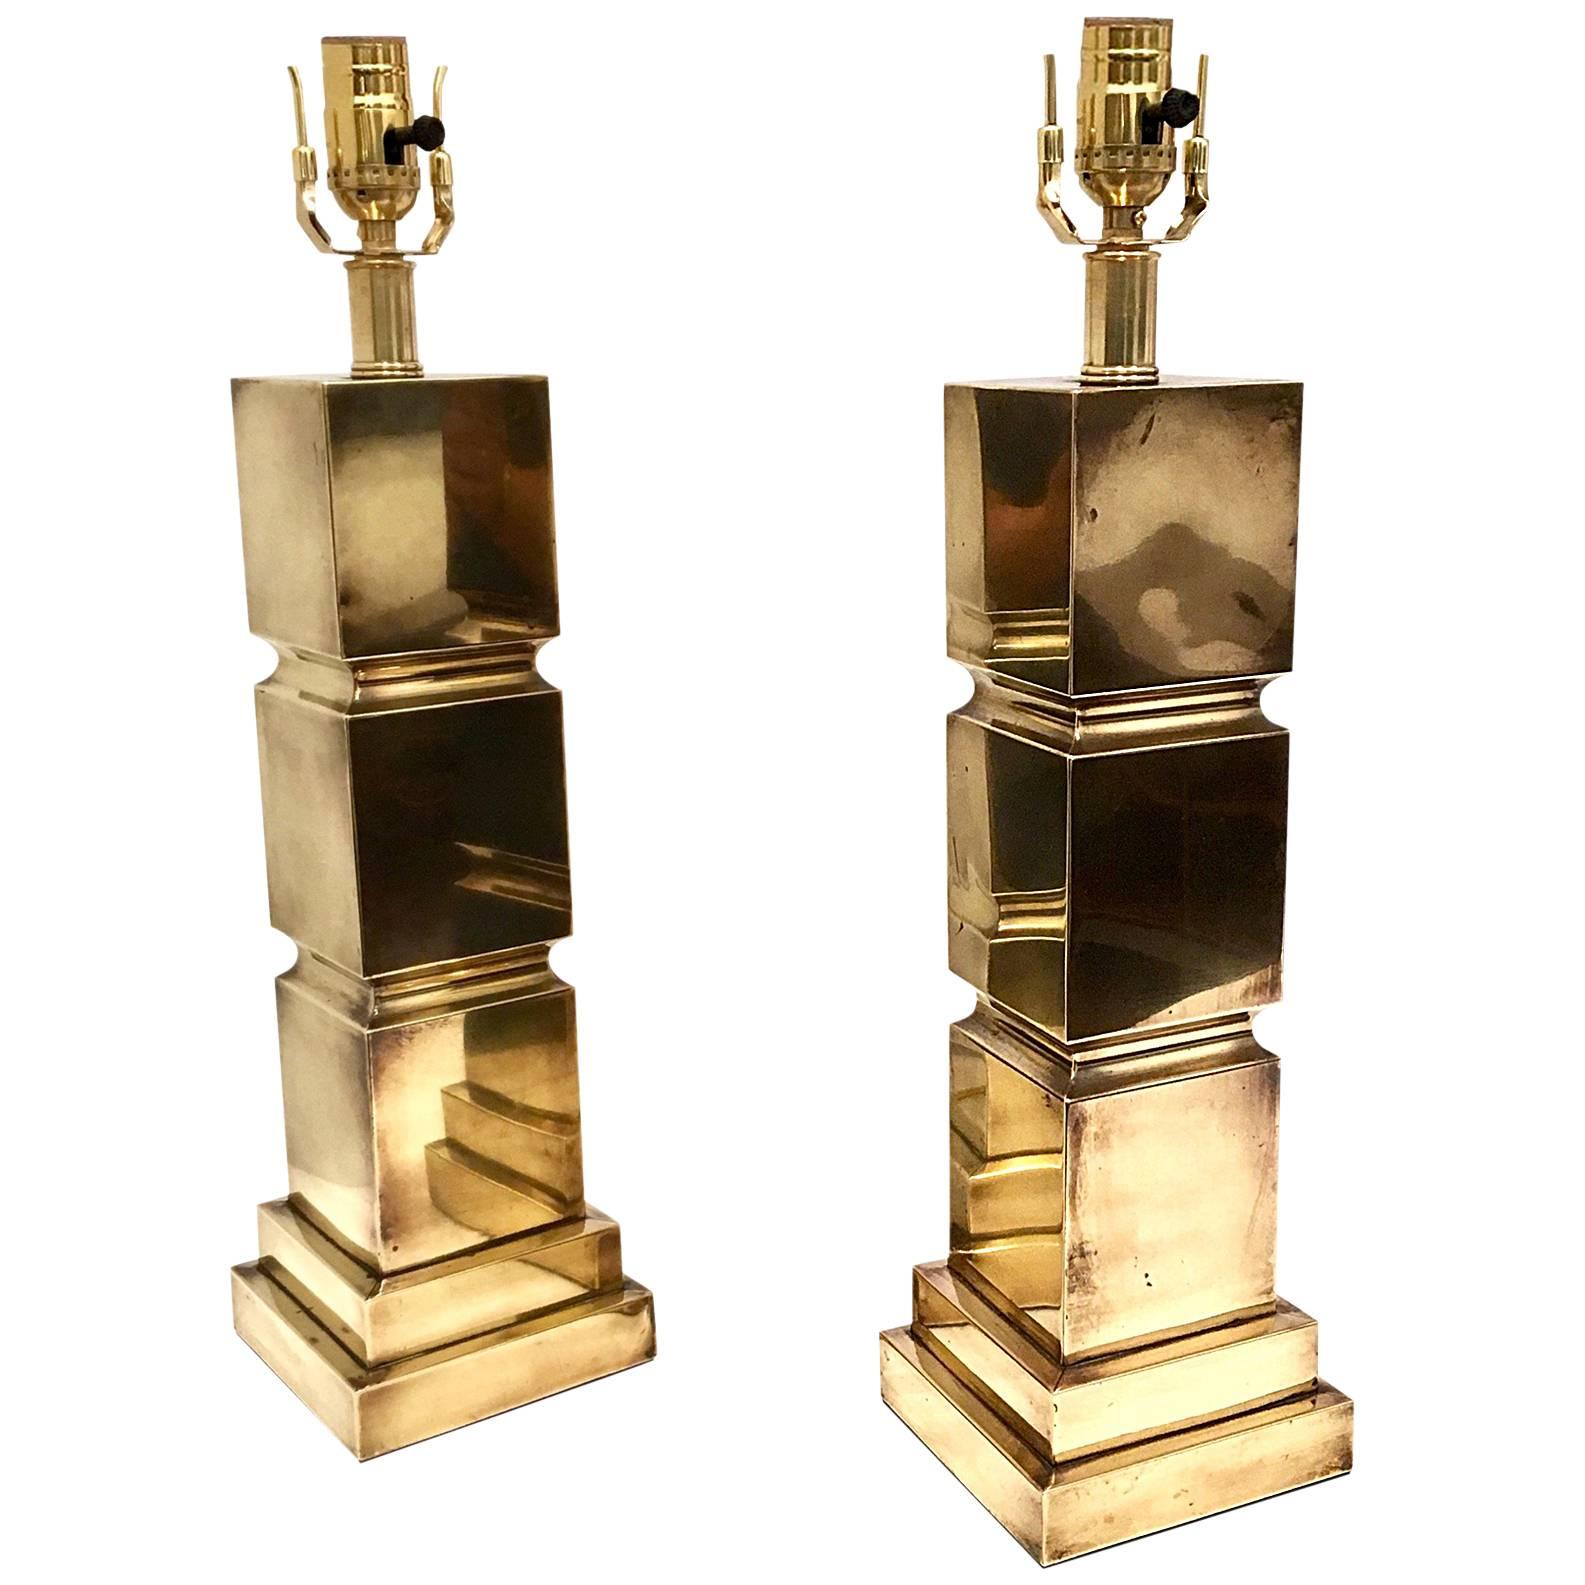 Striking Pair of Geometric Table Lamps in Polished Brass Finish